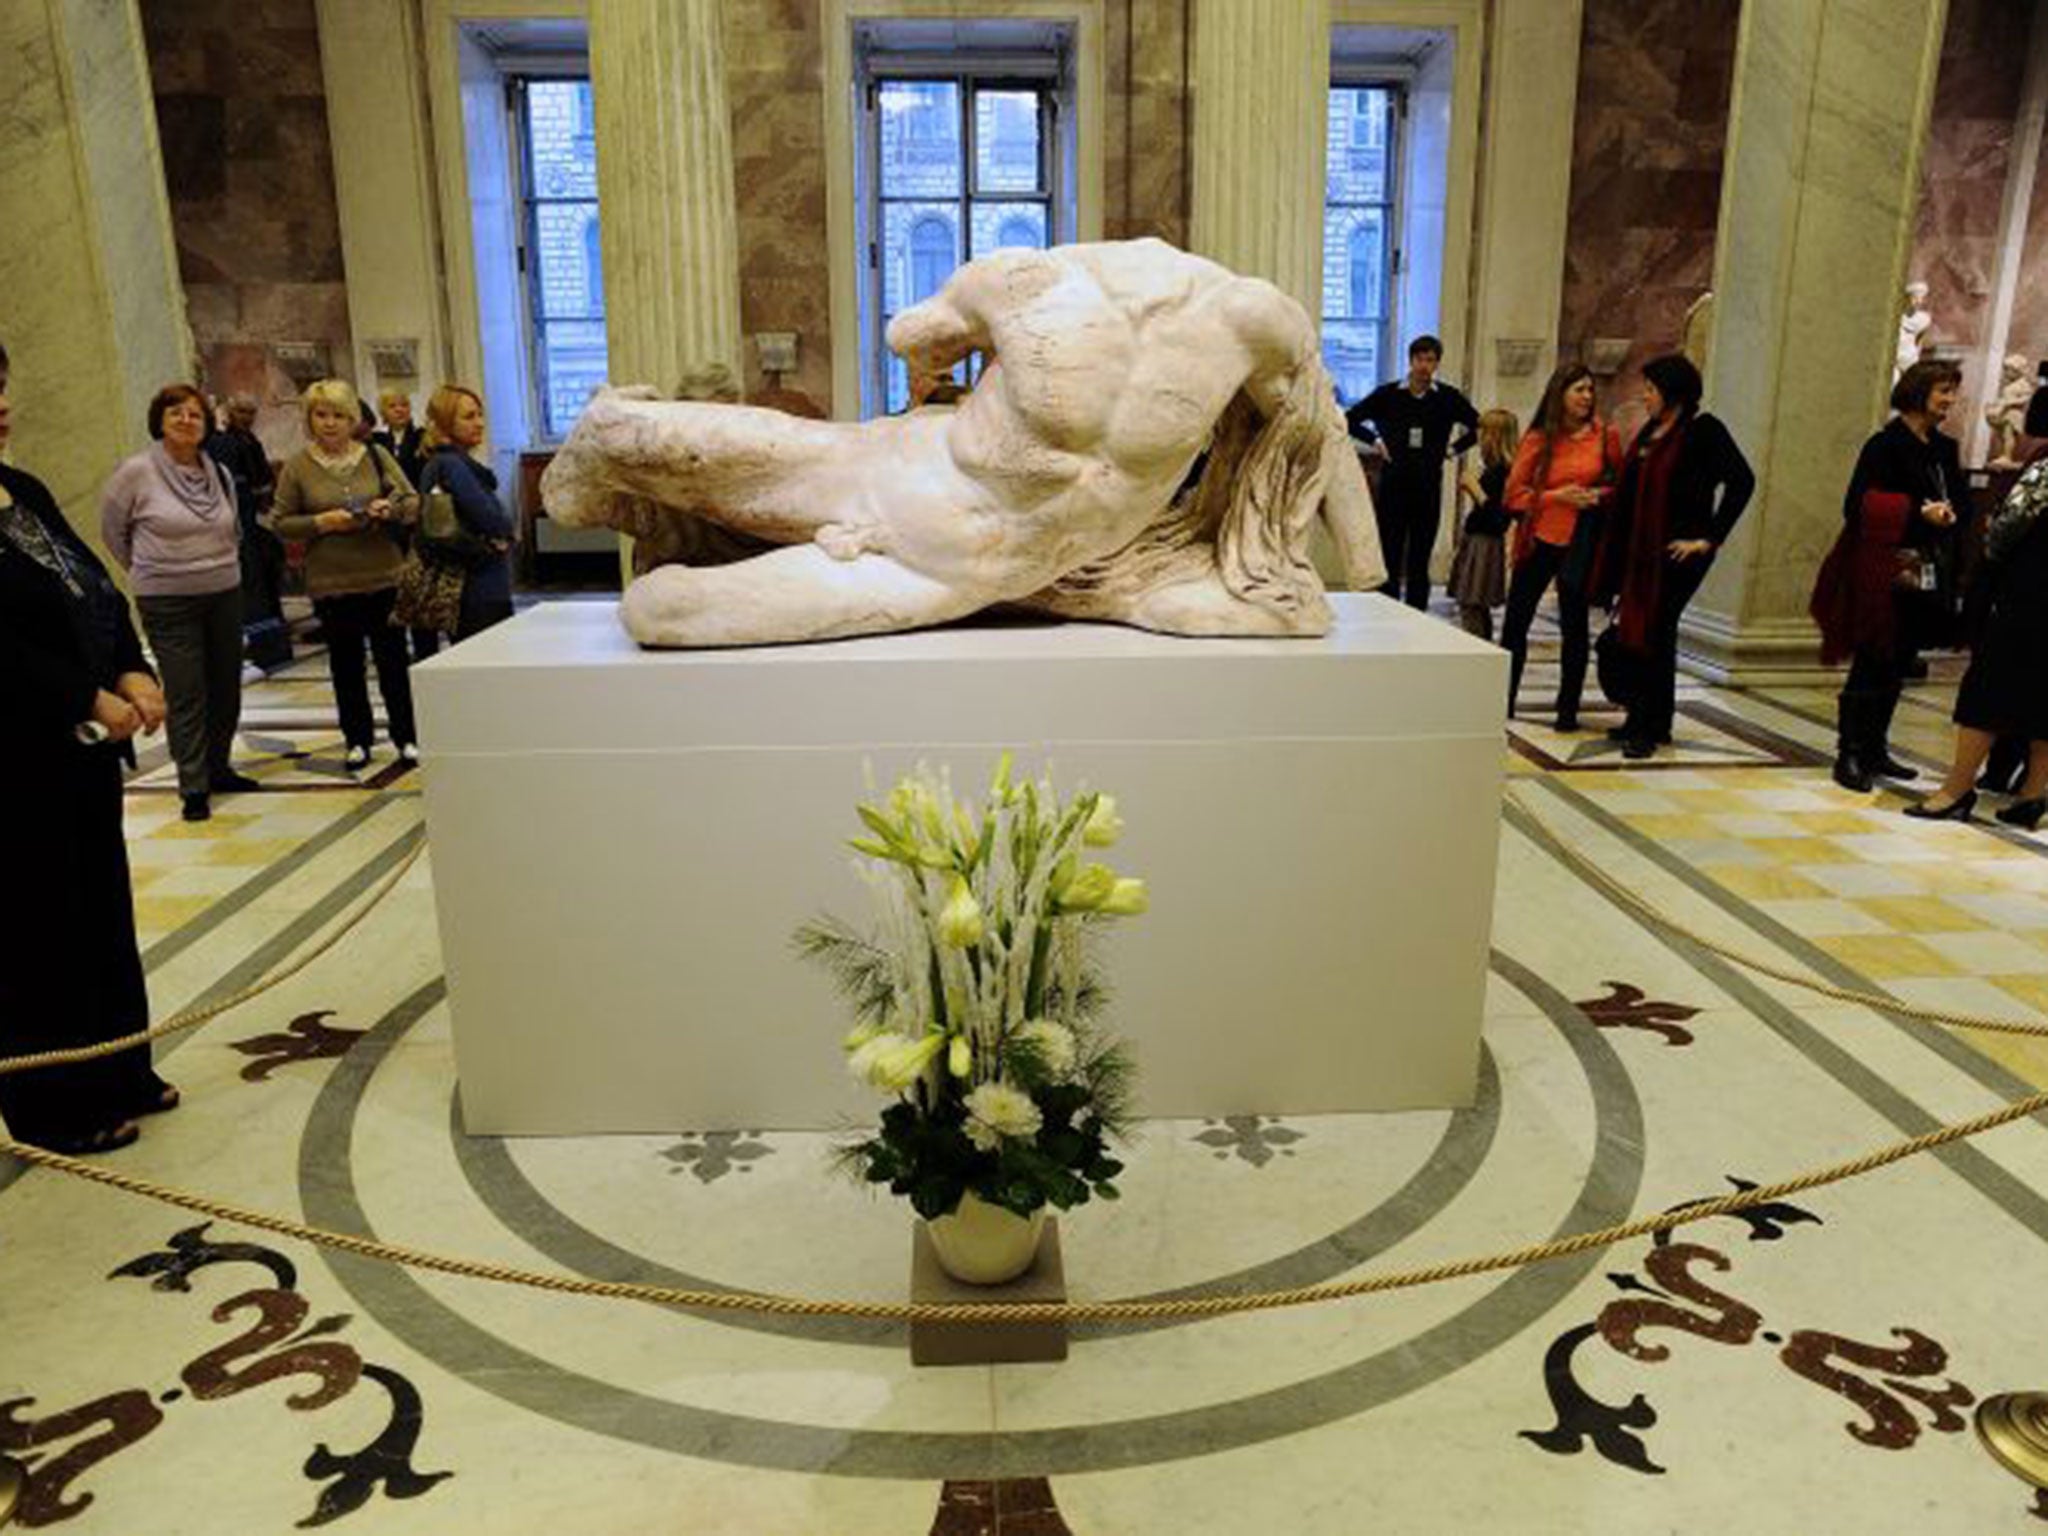 The loan of the statue of Ilissos to the Hermitage has reignited debate about the Marbles